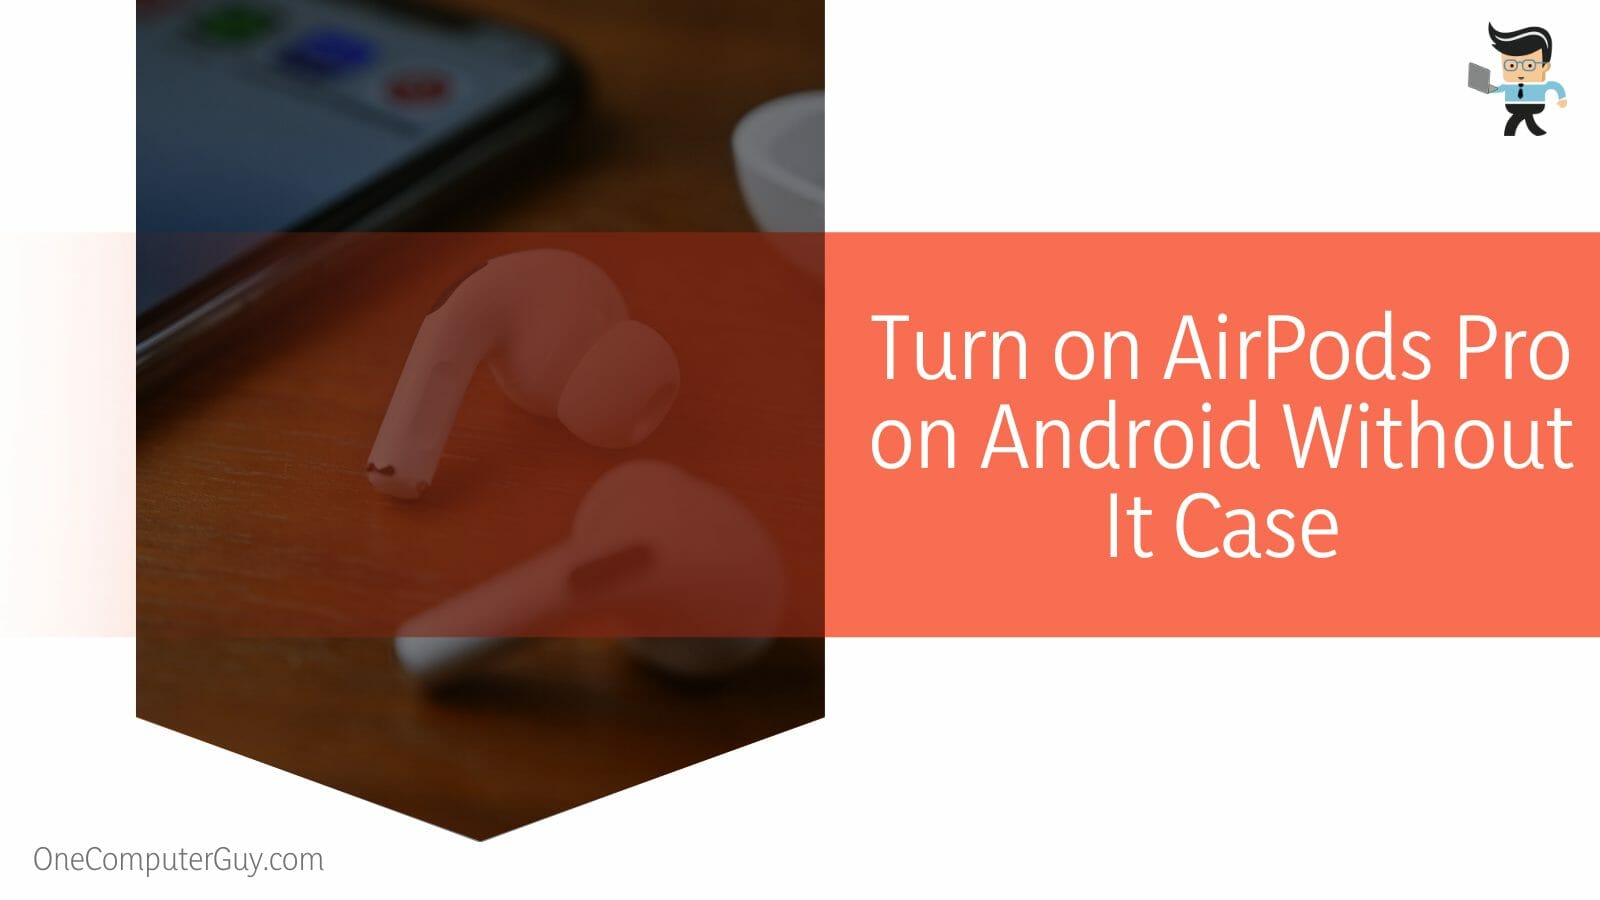 Turn on AirPods Pro on Android Without It Case